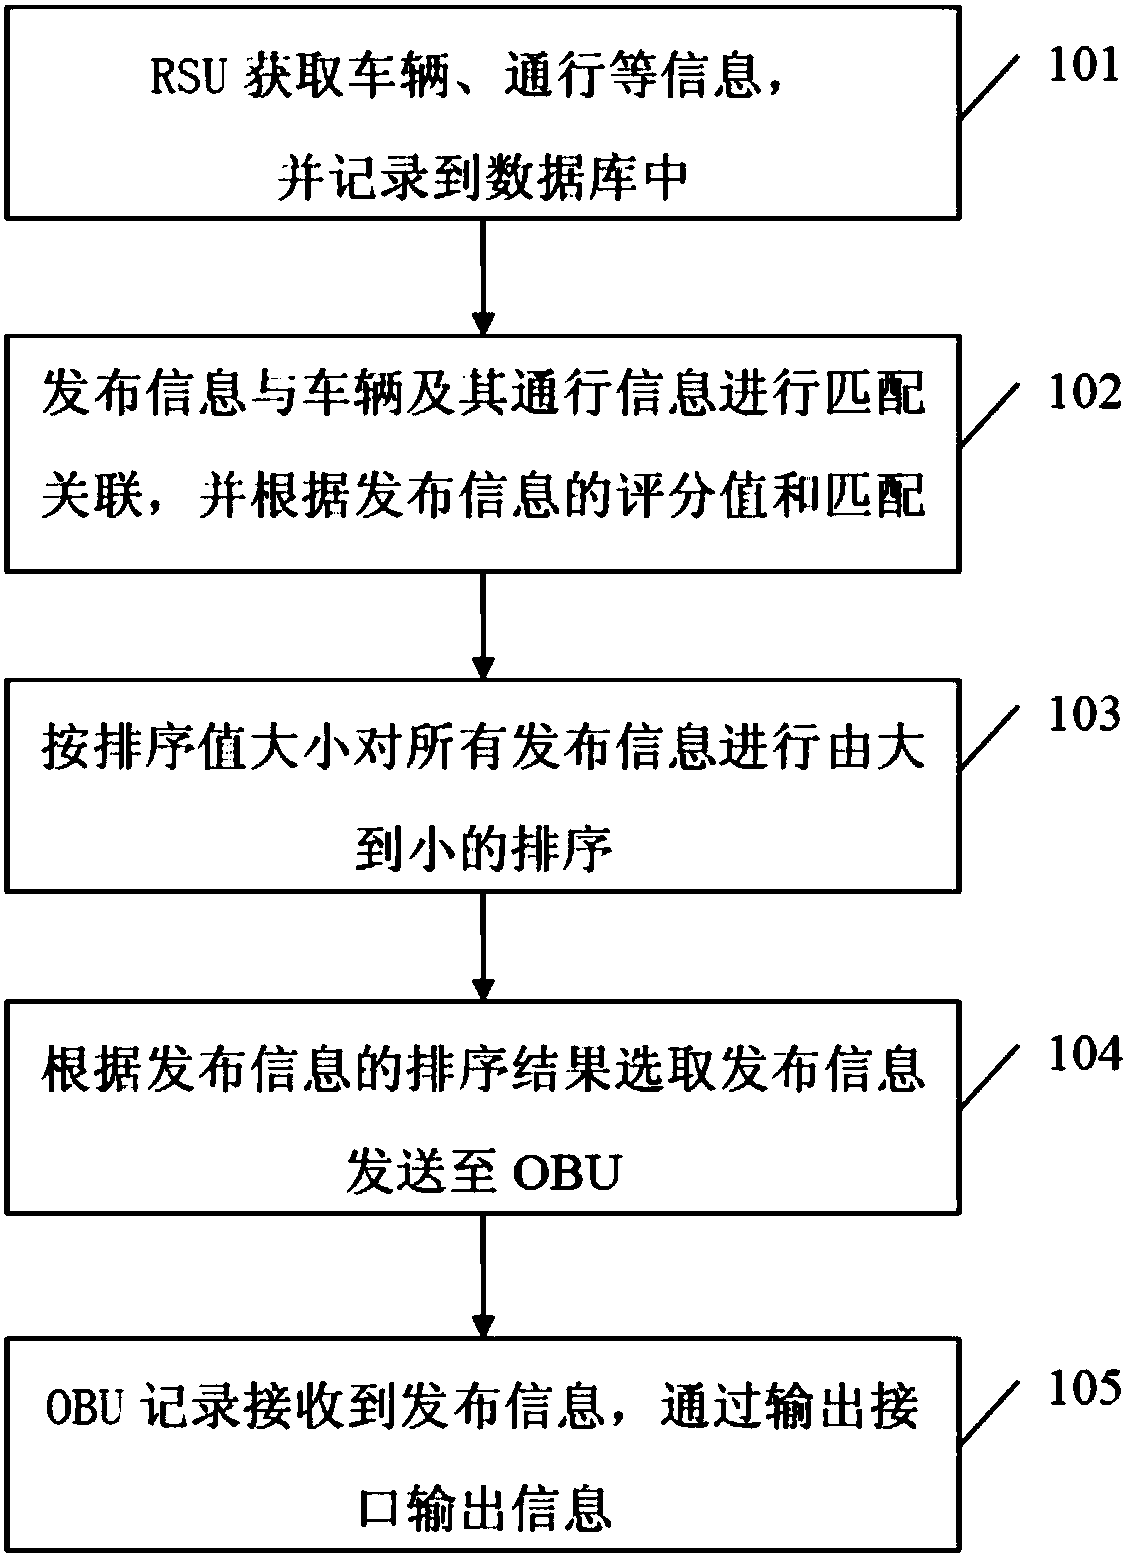 Method and system for pushing ETC (Electronic Toll of Collection) release information